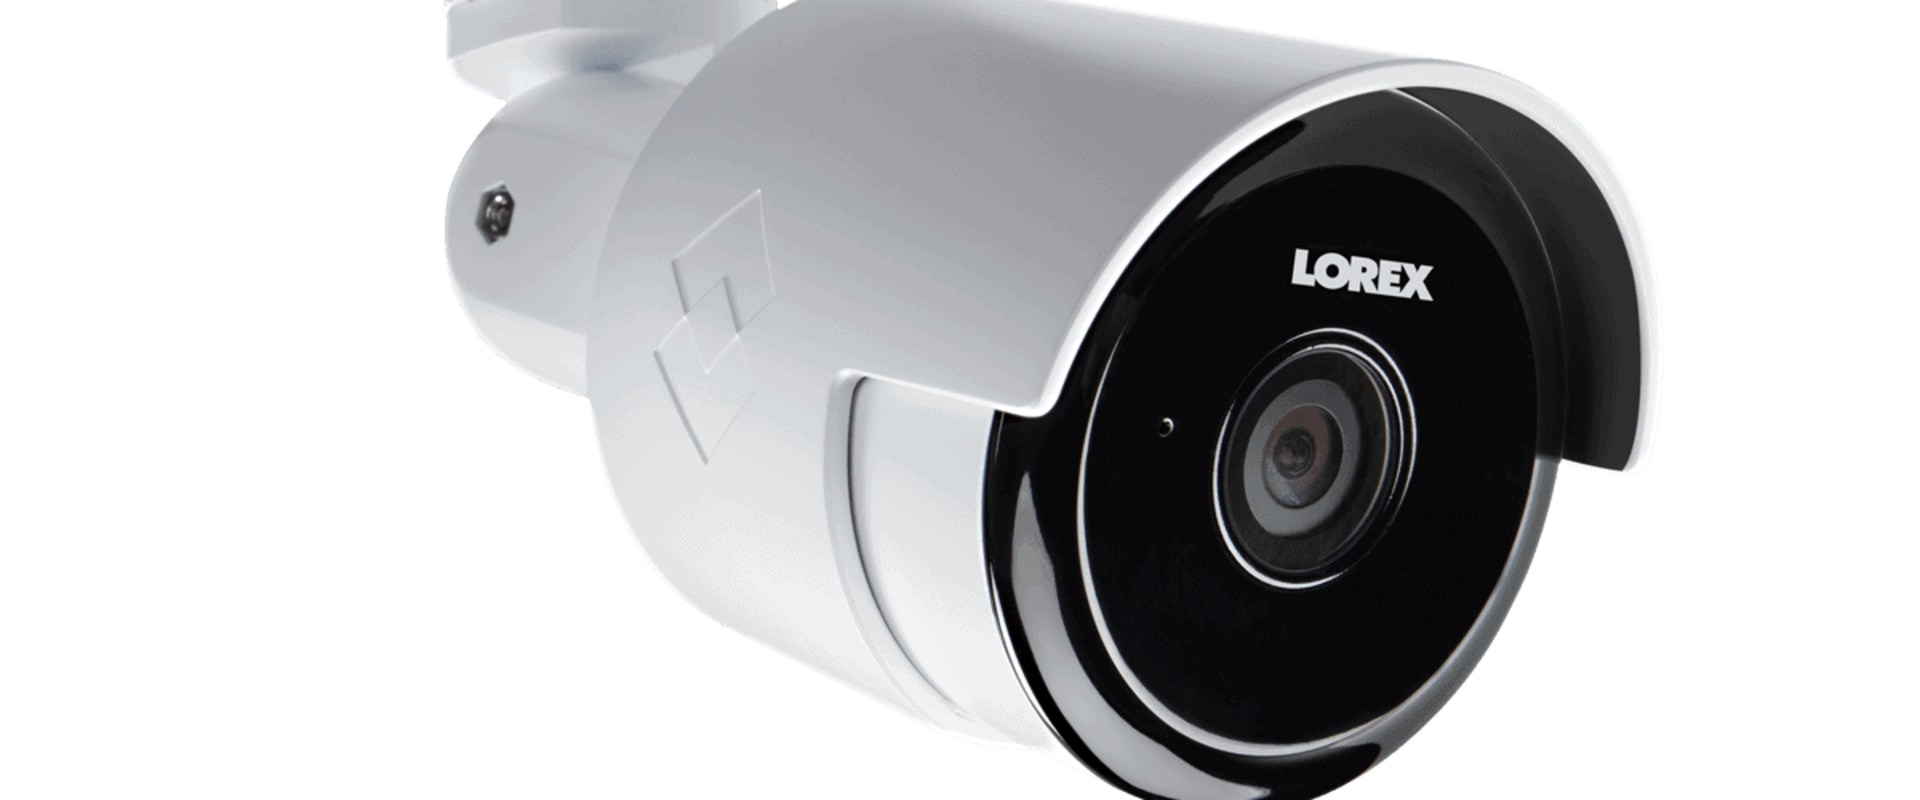 Wireless Motion Detection Cams: An Overview